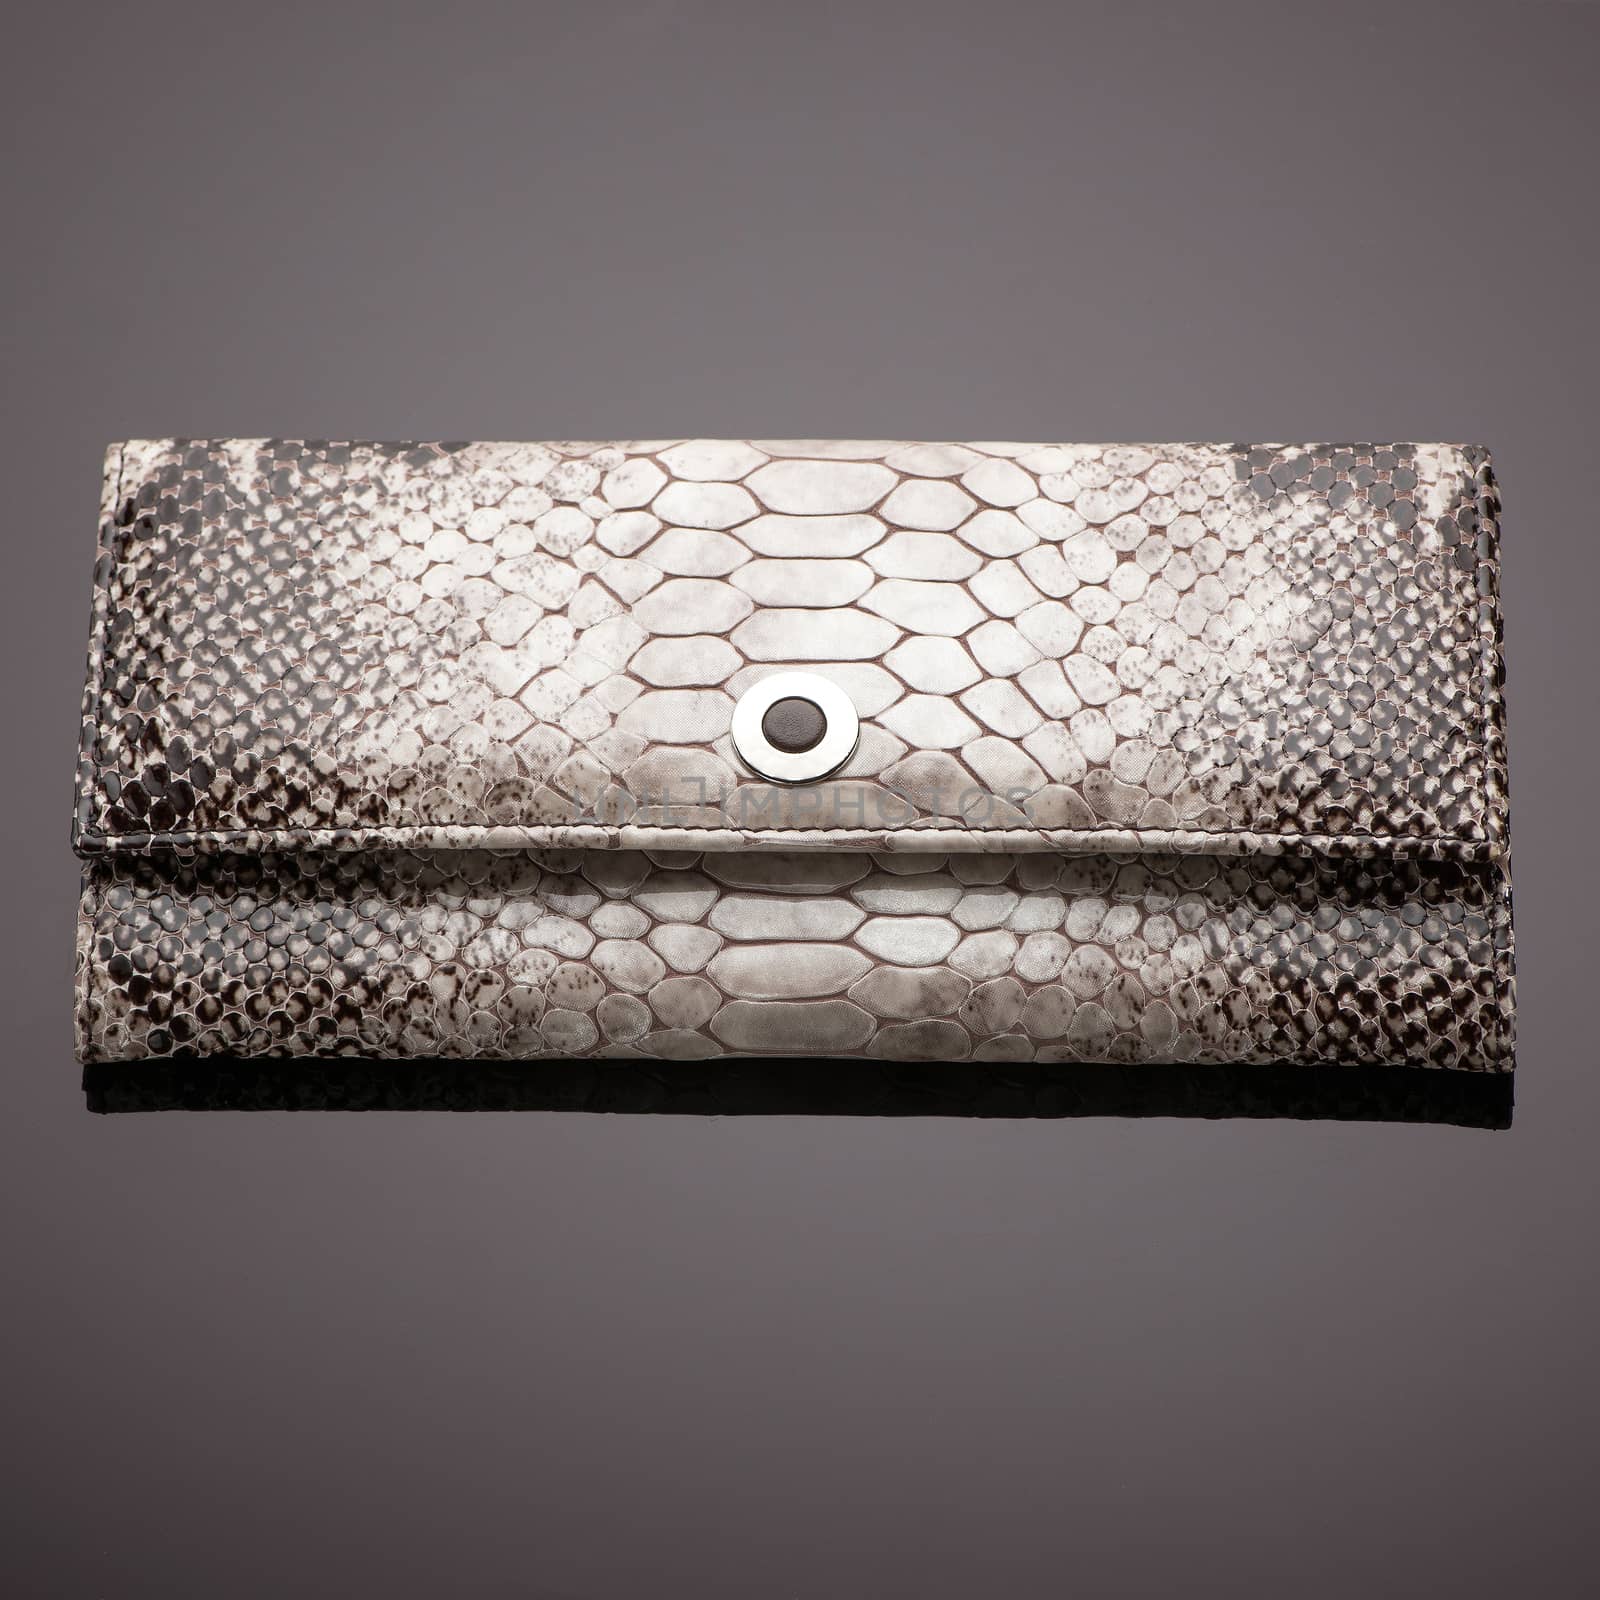 Fashionable women's wallet made of crocodile skin on a brown background